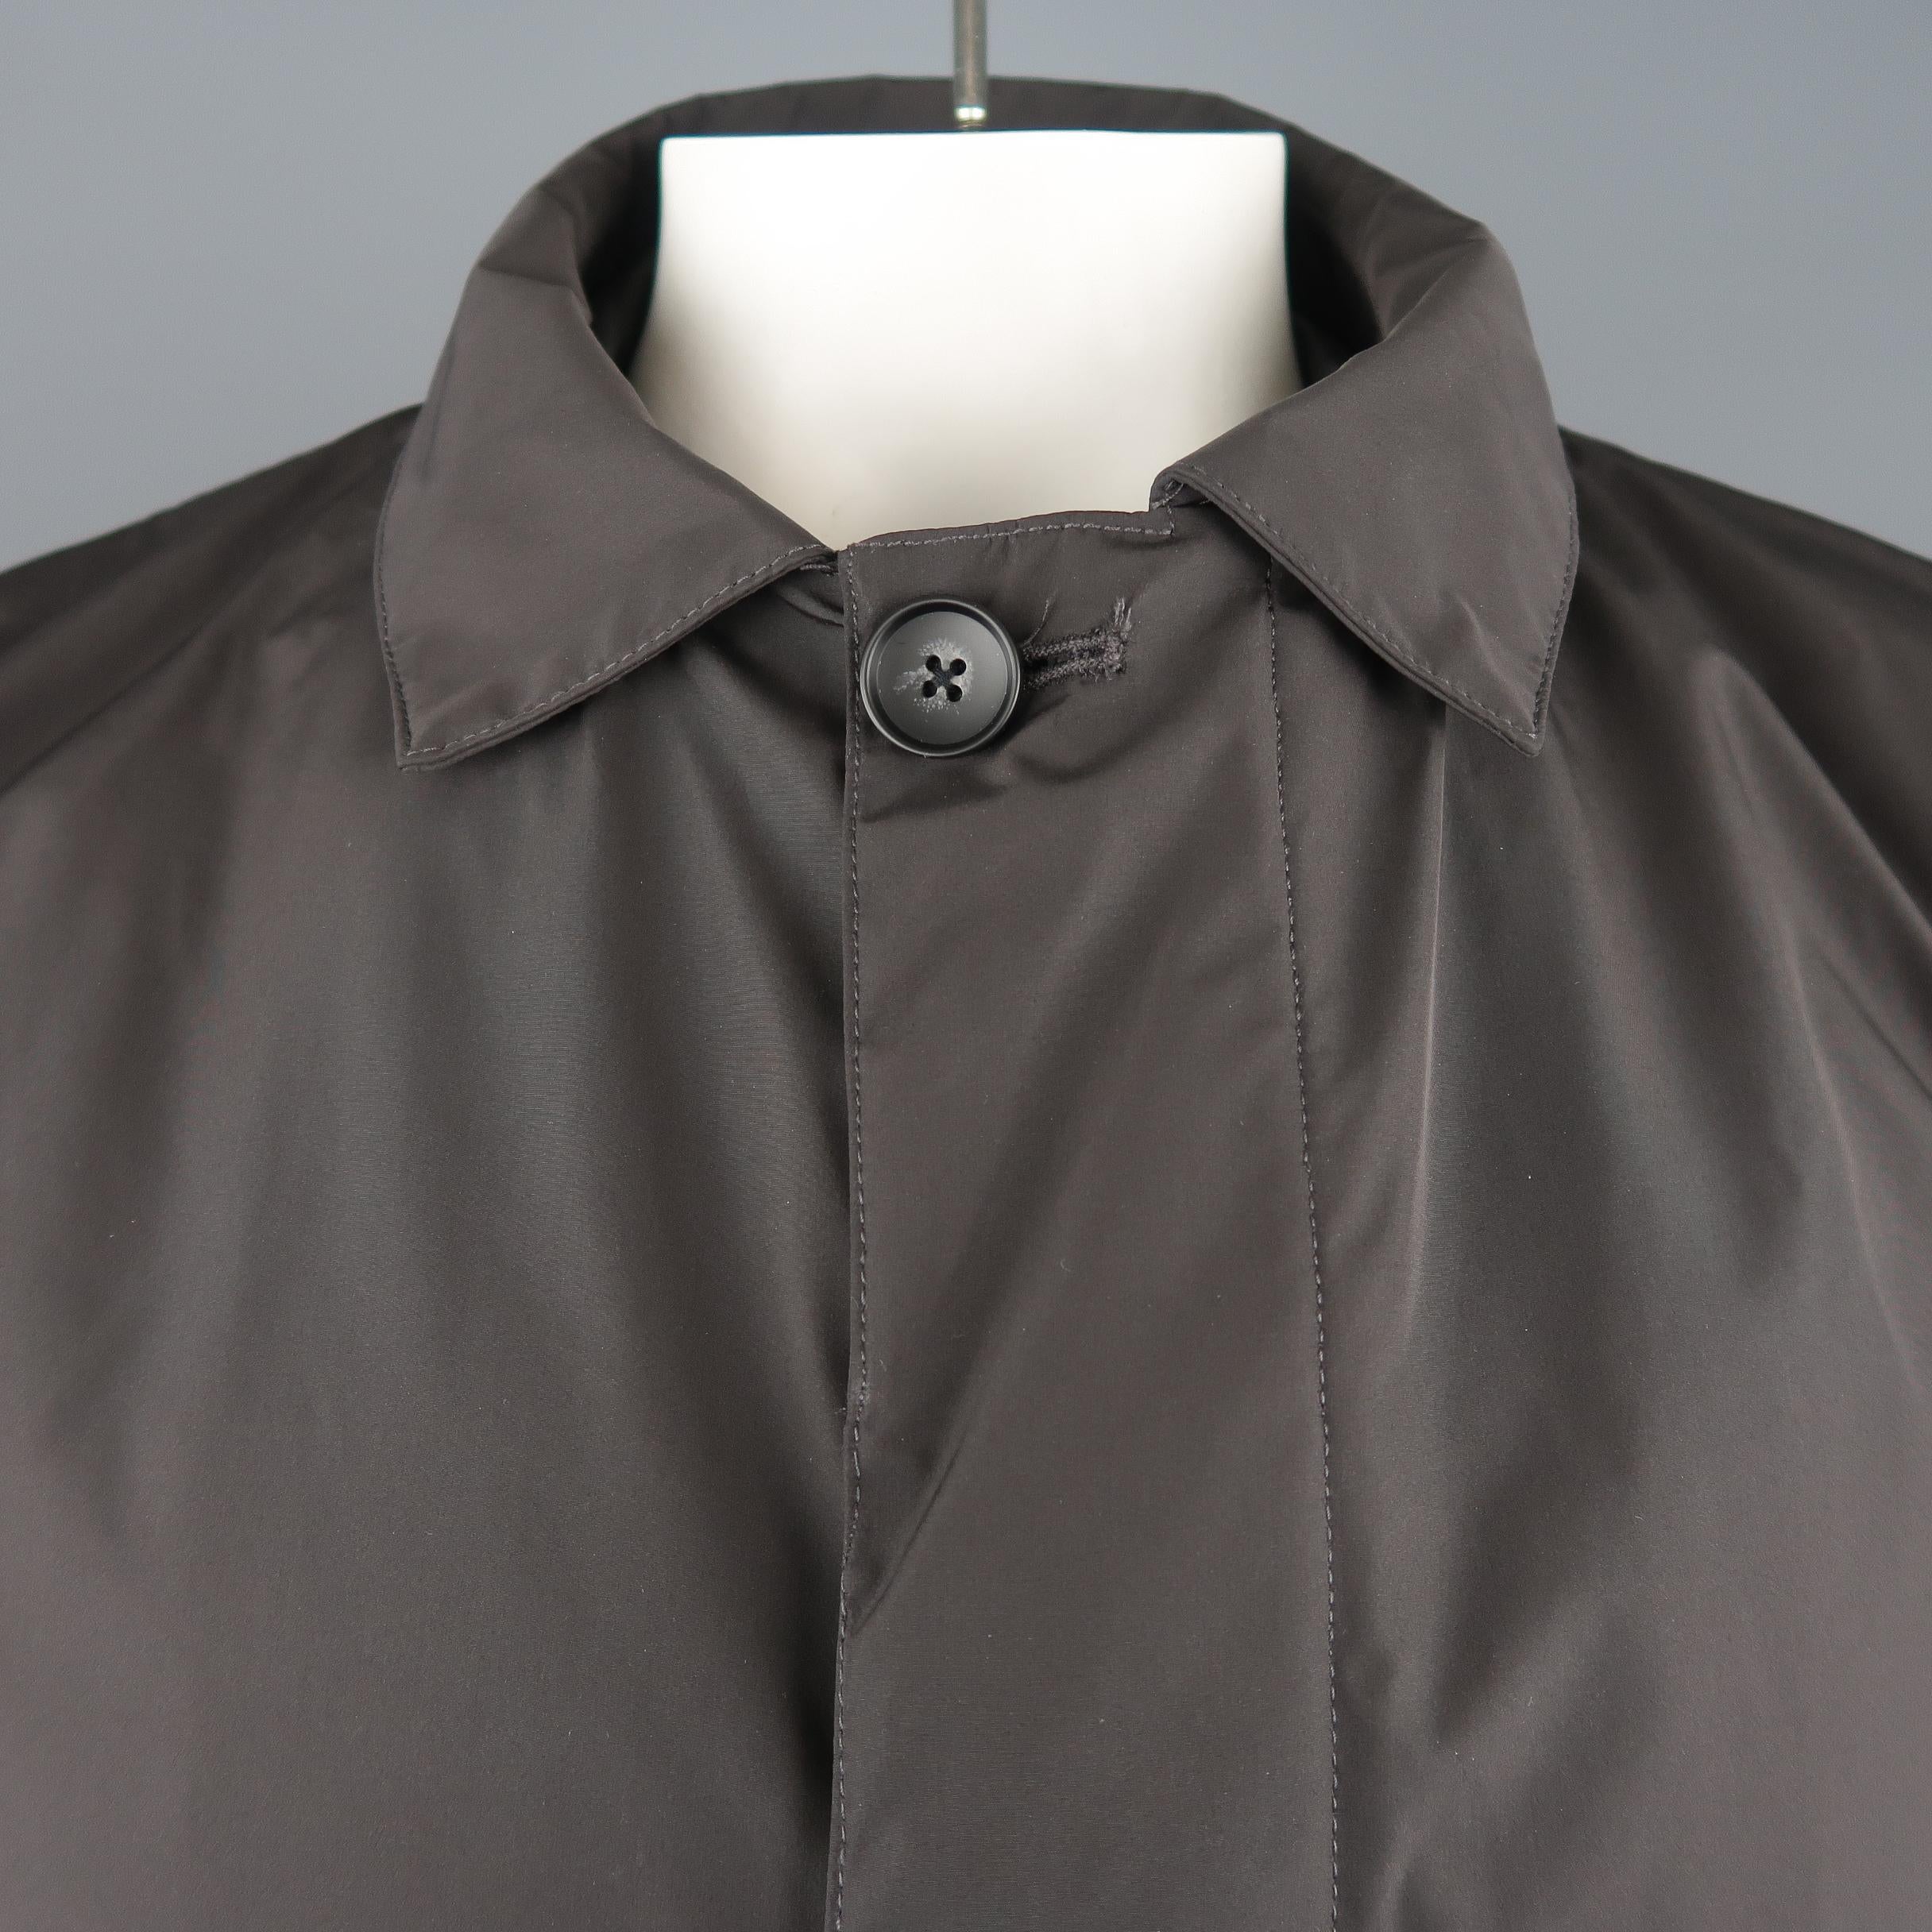 EREDI PISANO raincoat comes in taupe brown waterproof fabric with a pointed collar, zip closure with hidden button placket, slanted zip pockets, button cuffs, and detachable liner that zips into a bomber jacket. Made In Italy.
 
New with Tags.